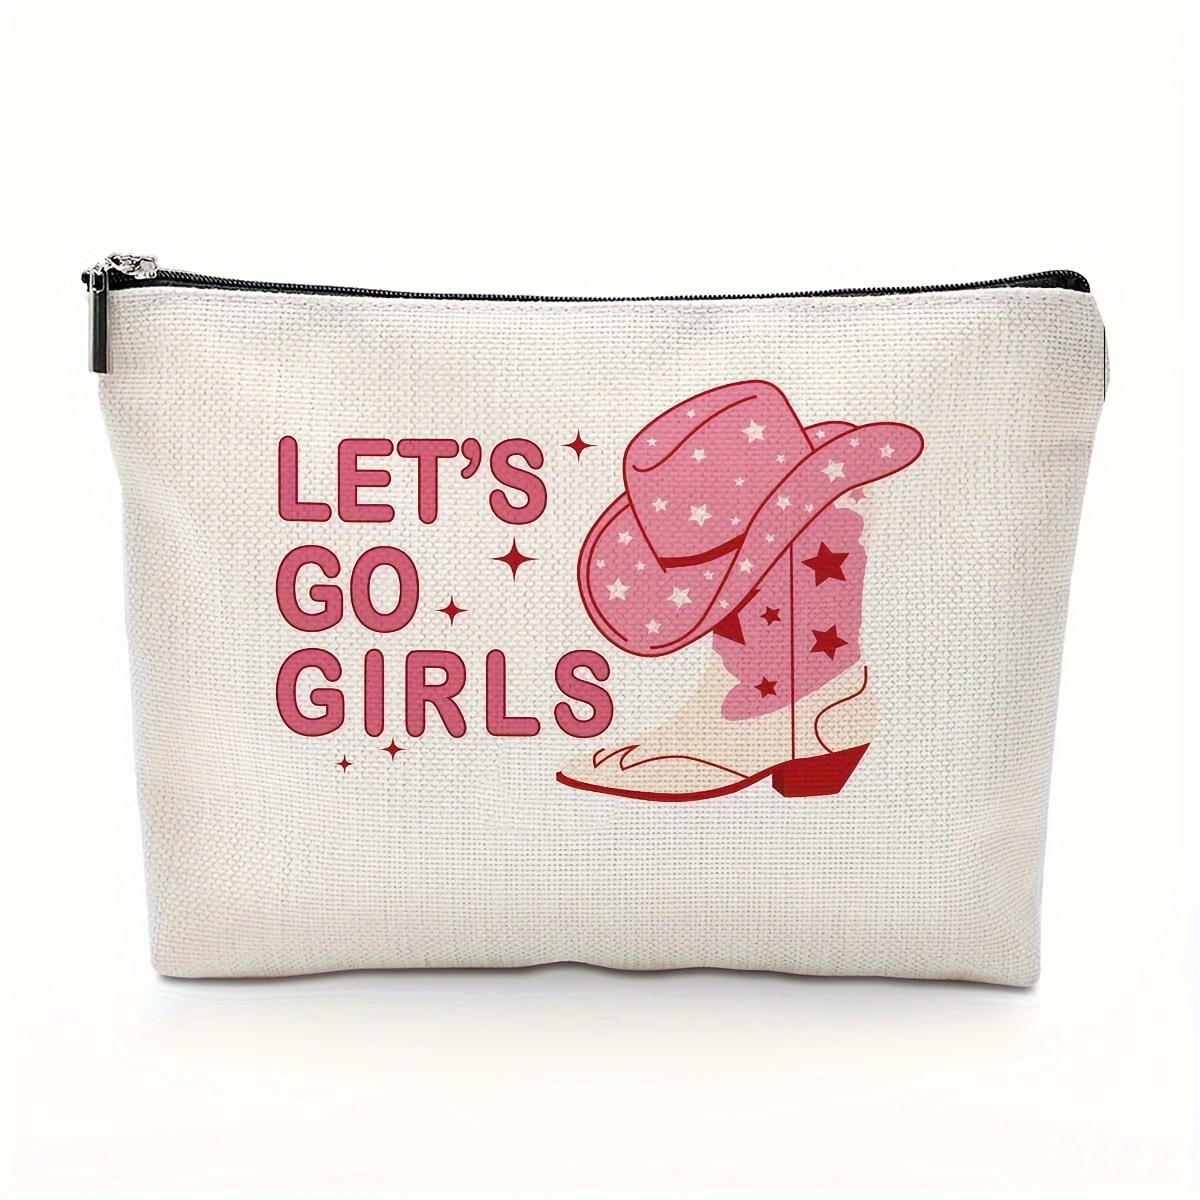 

Funny Western Cosmetic Bag Western Gifts Cowgirl Inspired Country Makeup Bag Travel Toiletry Bag Graduation Birthday Gifts For Women Friends Female Daughter Coworker Bestie Sister